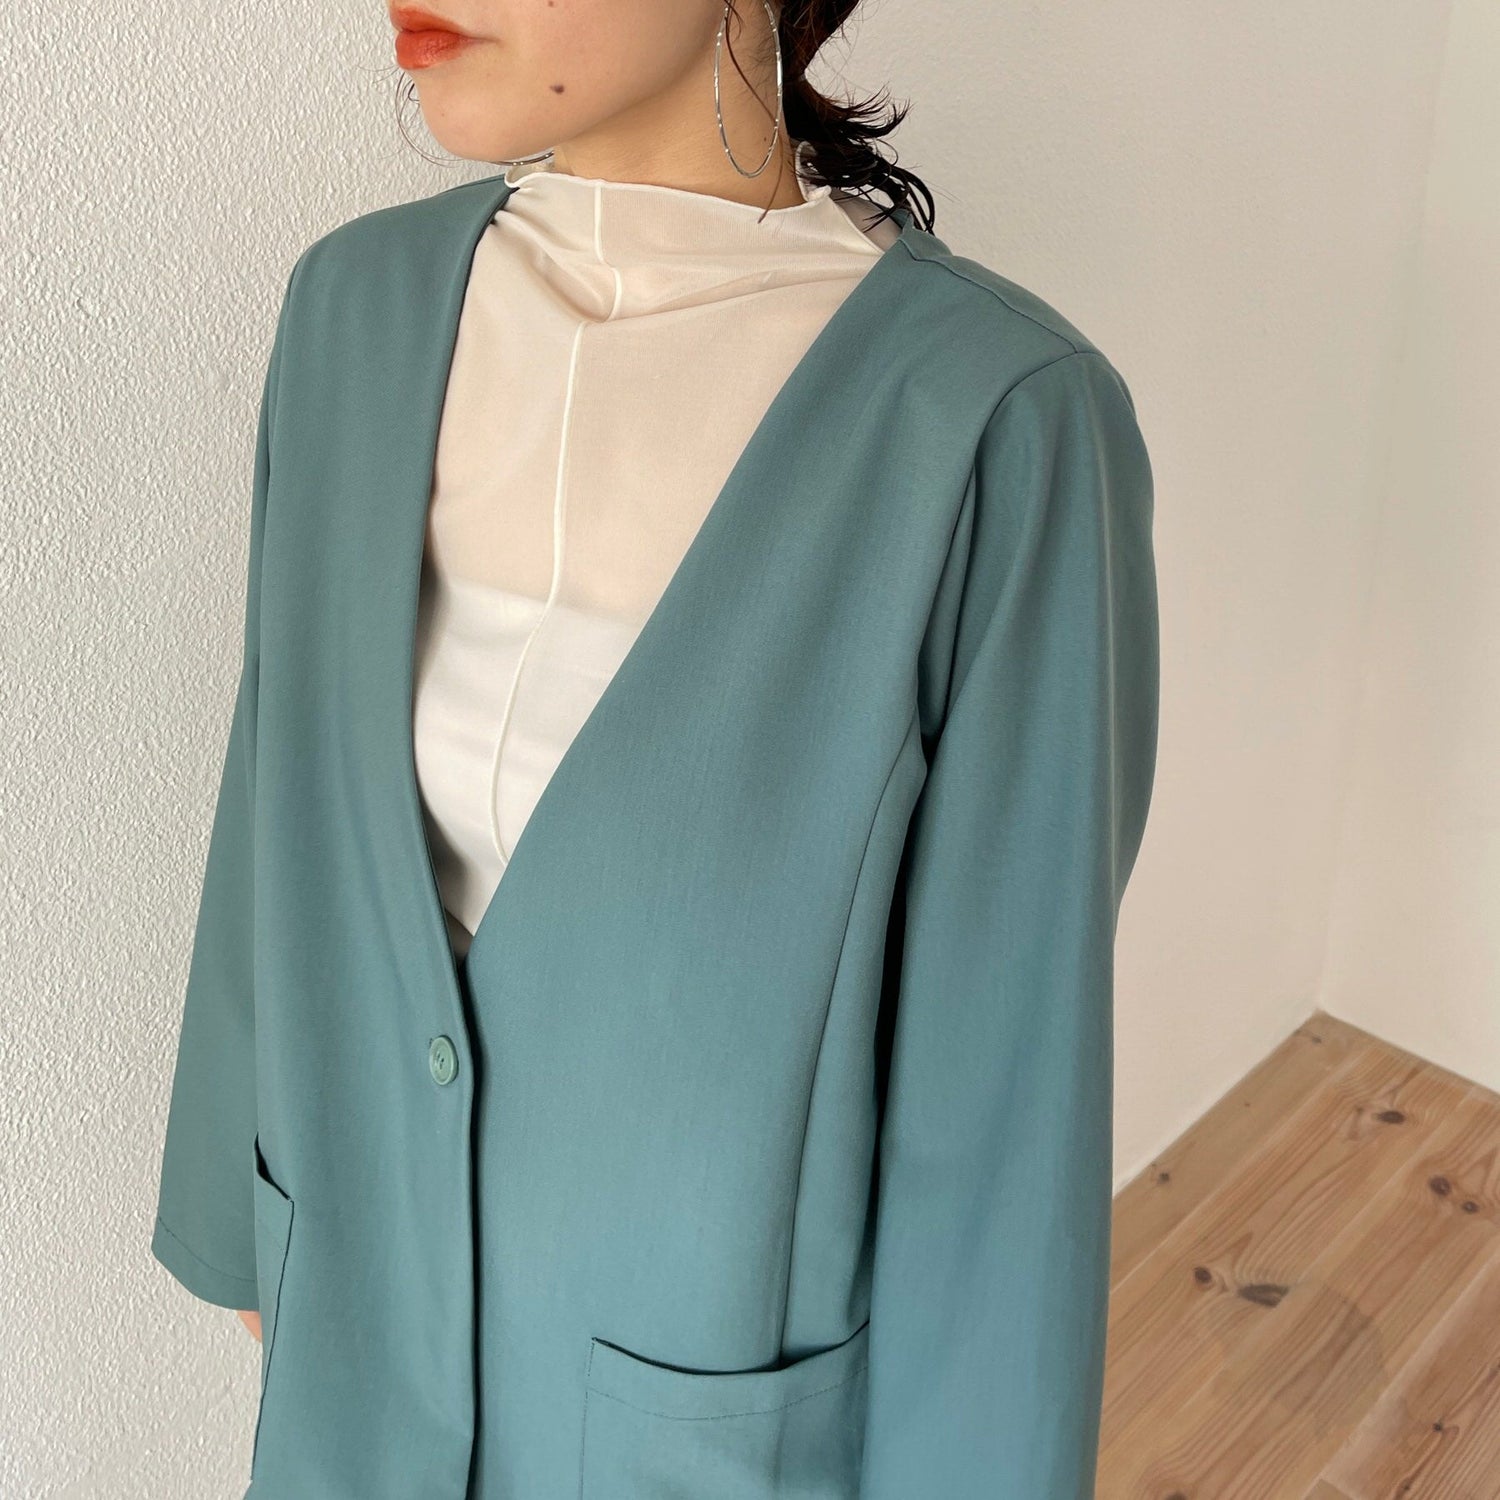 【SAMPLE】perfect silhouette no collar set up / green